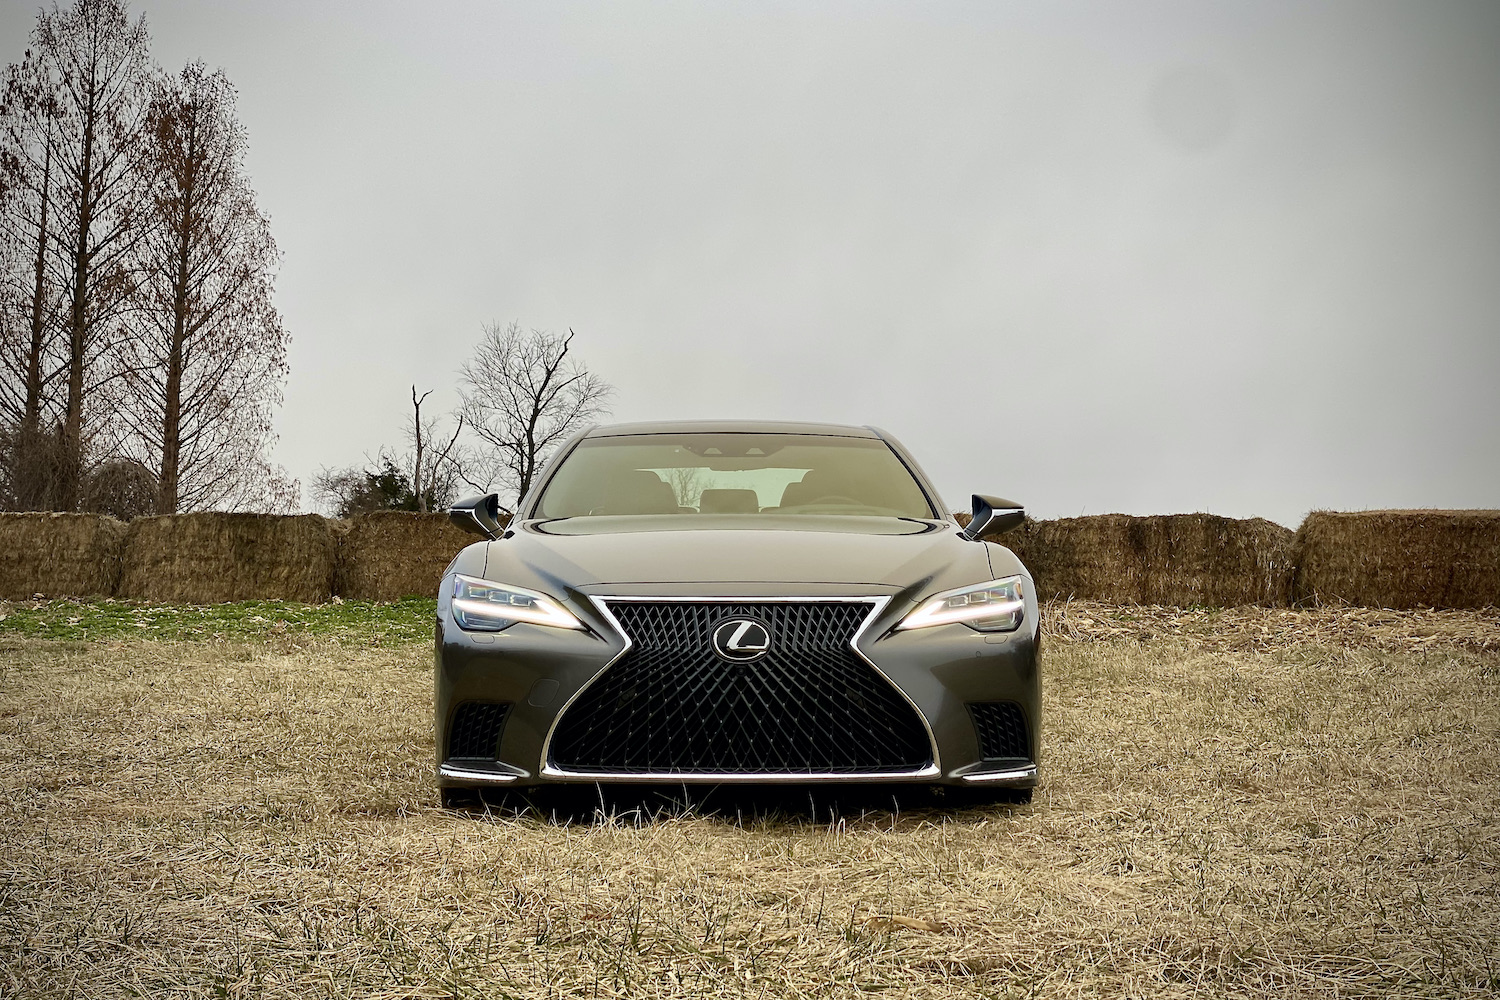 The front end of the 2021 Lexus LS500 in a field in front of hay bales.